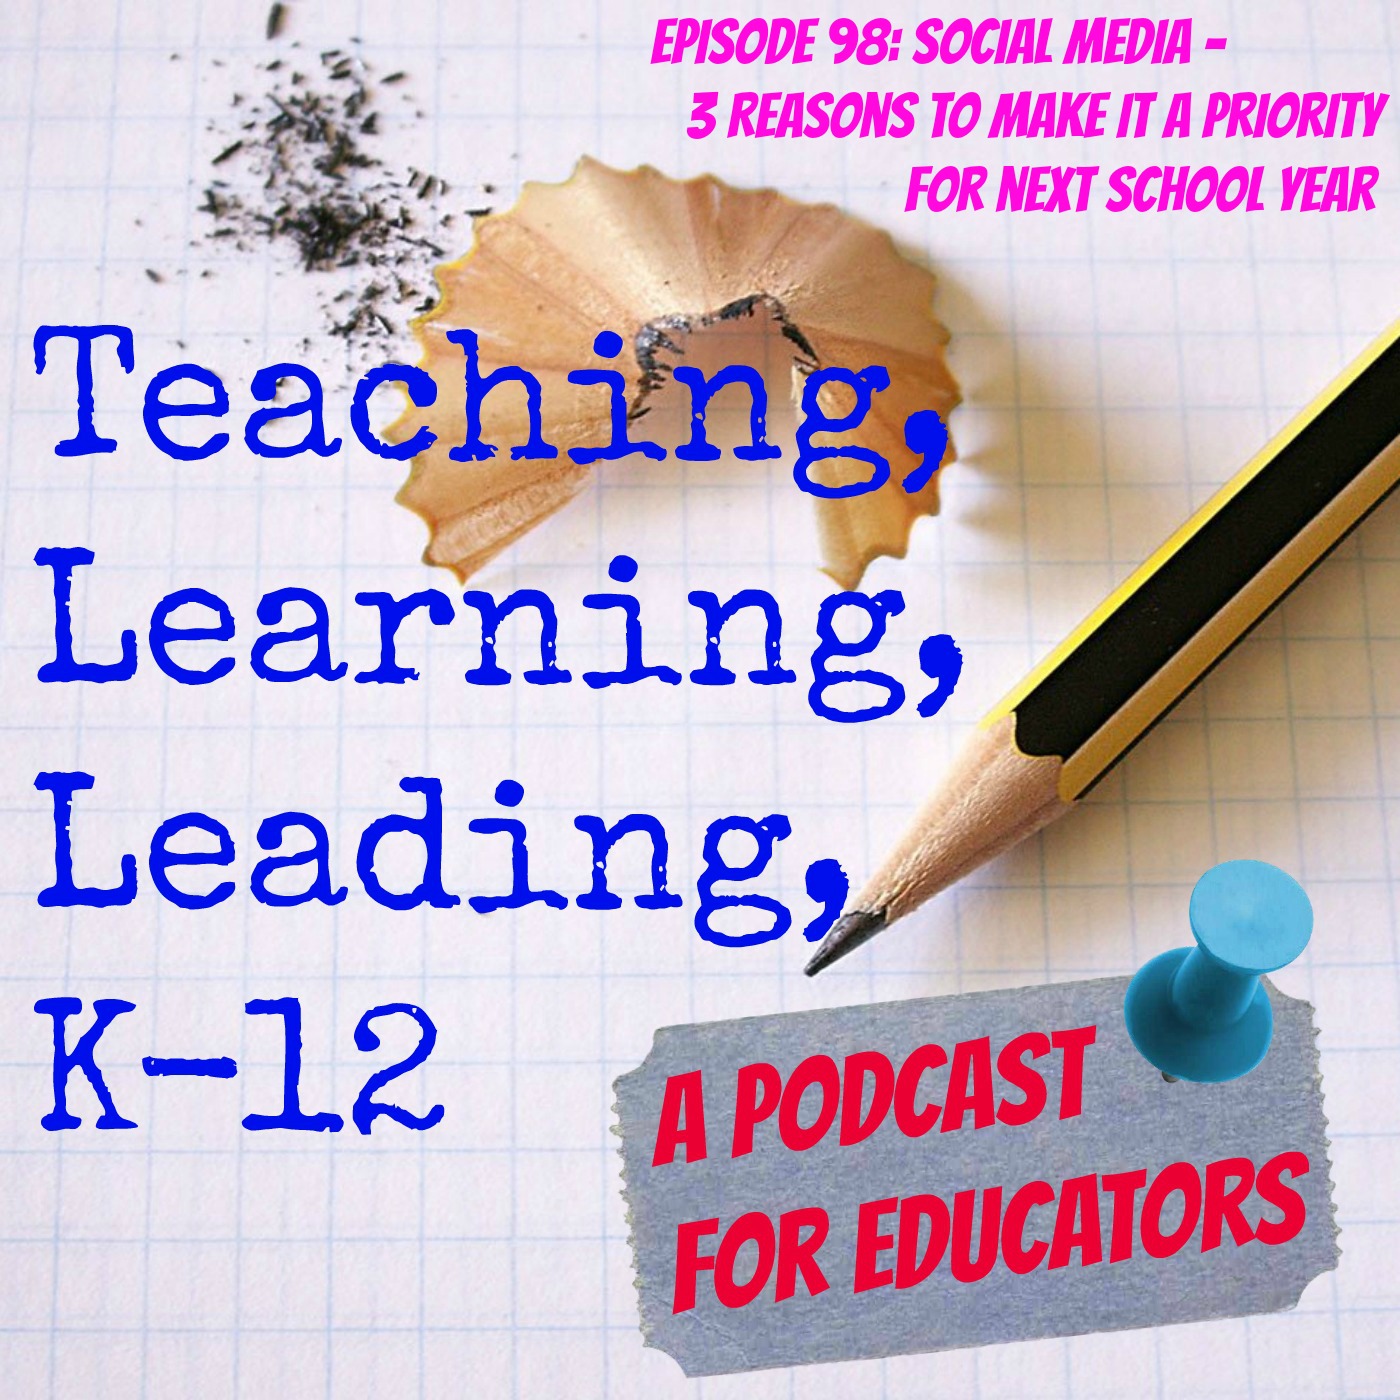 Episode 98: Social Media - 3 Reasons to Make it a Priority for this Next School Year Image